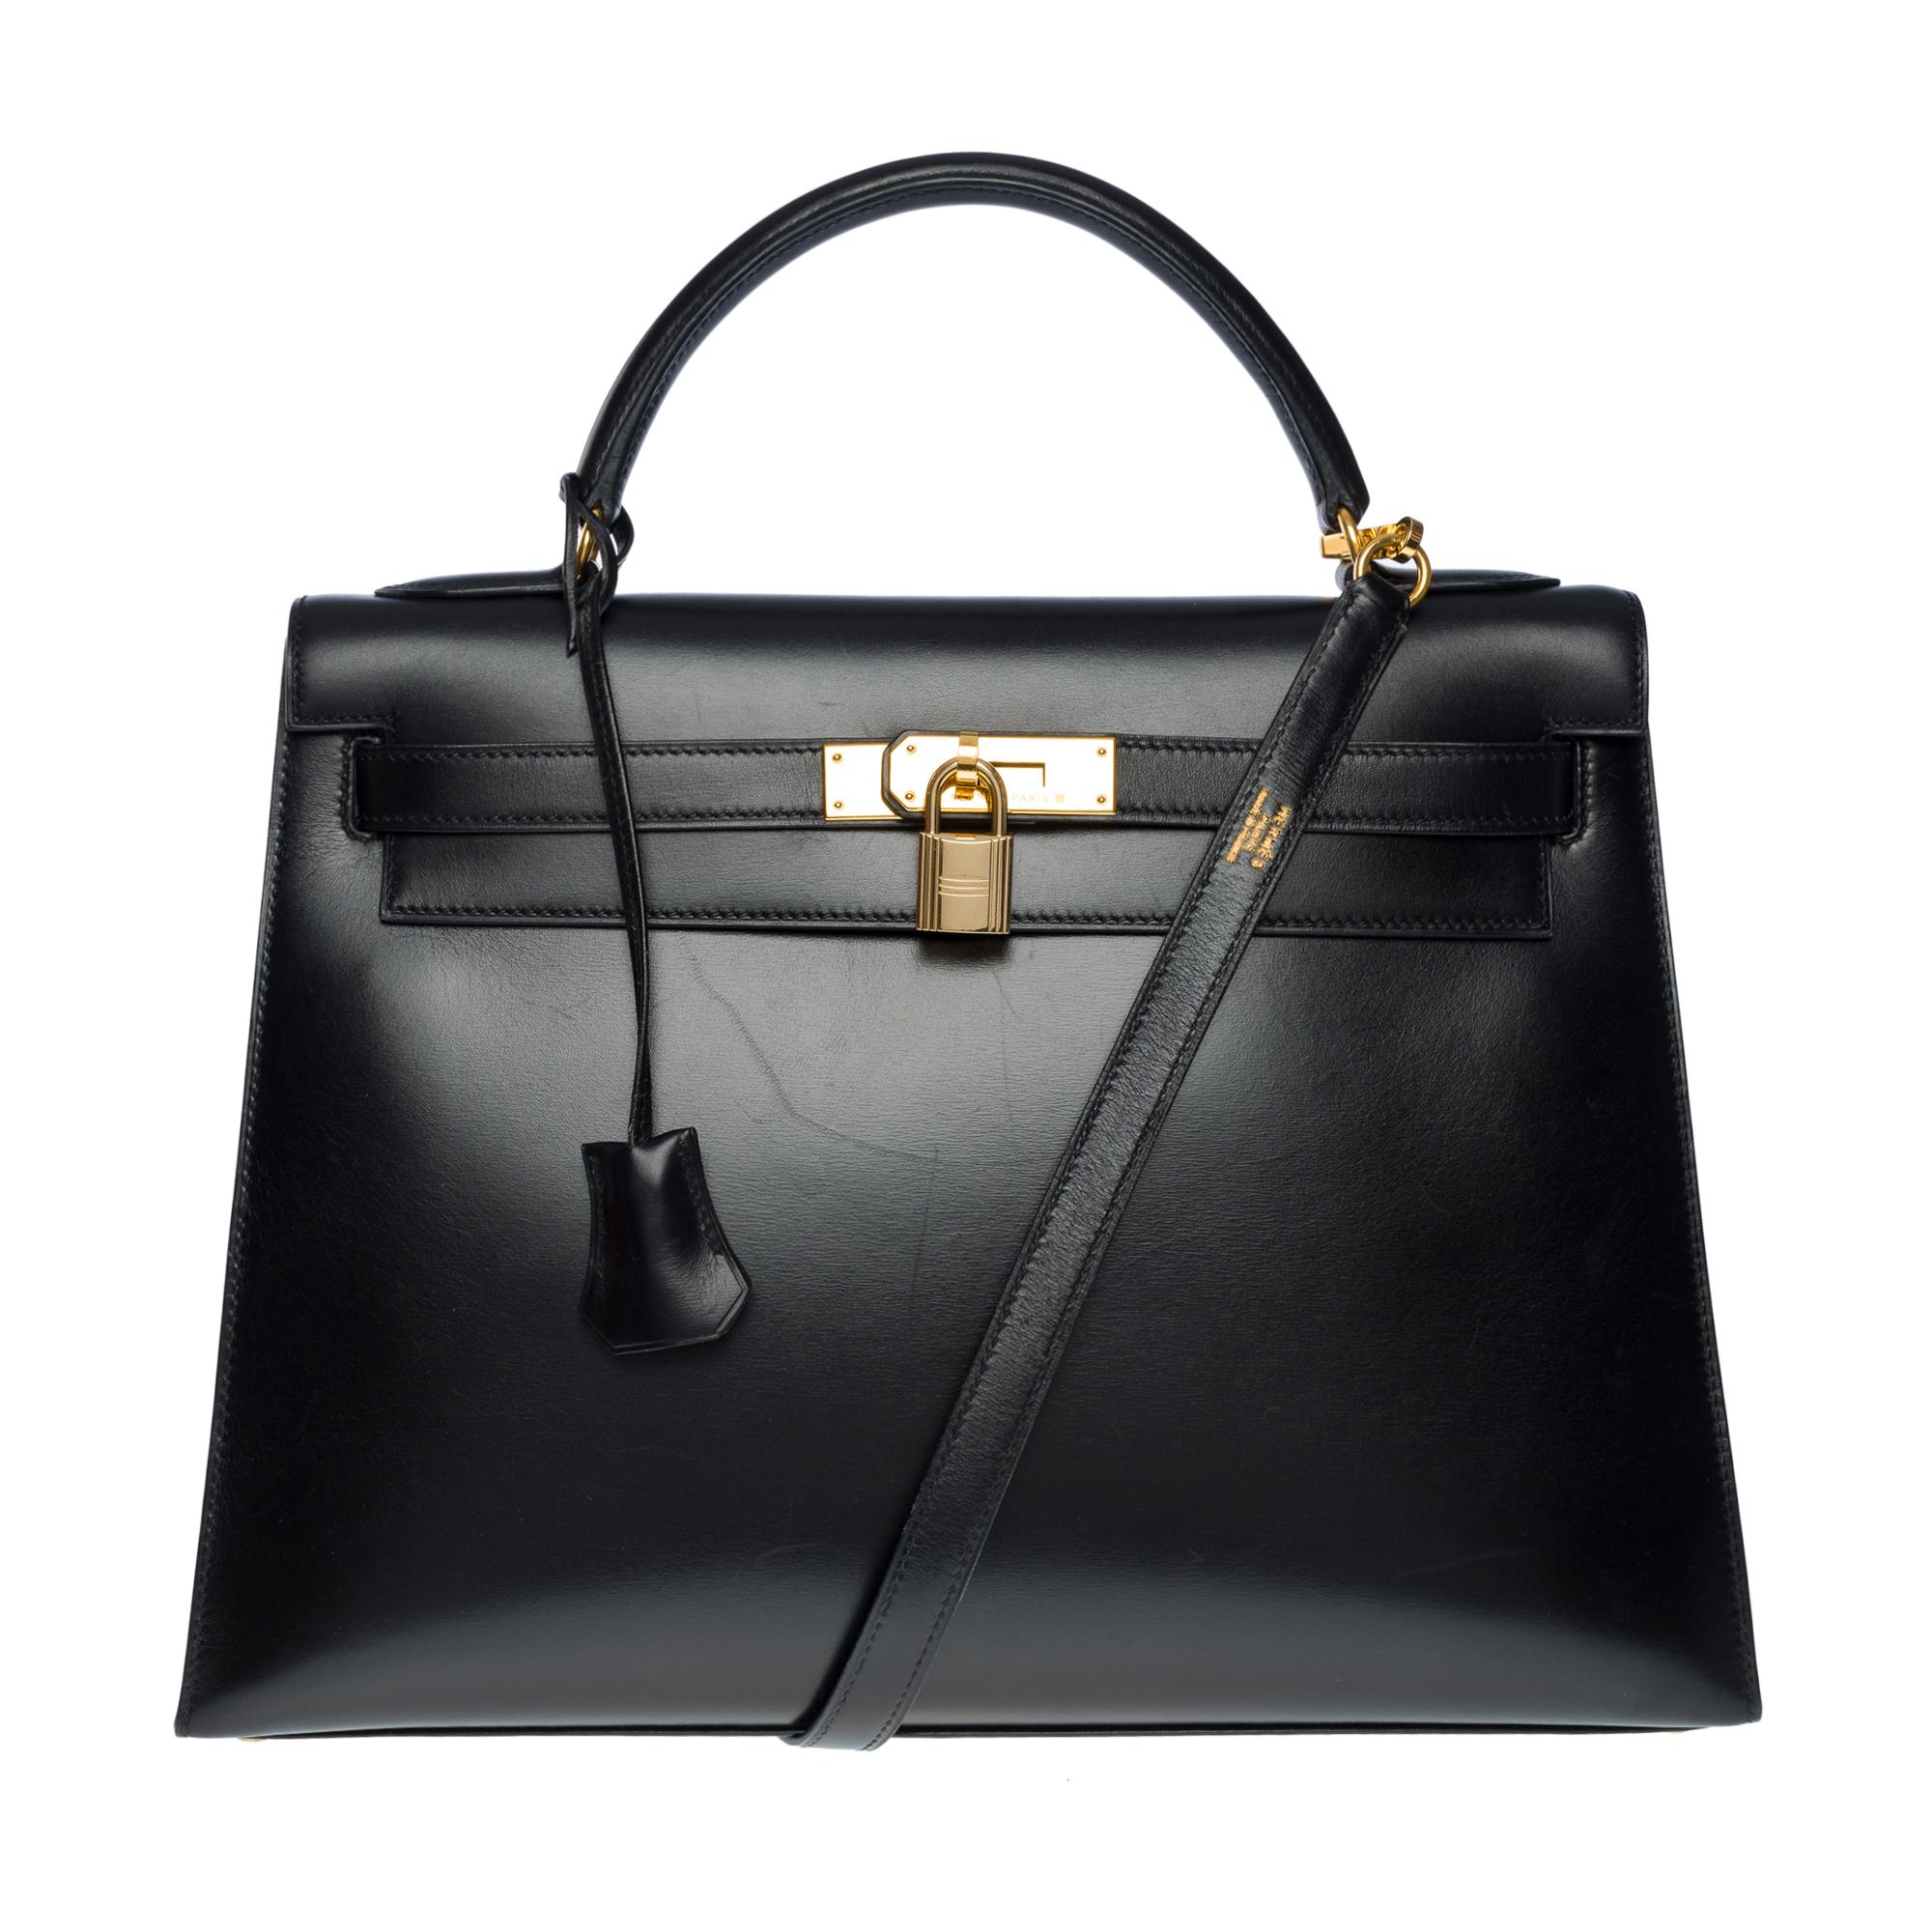 Stunning Hermes Kelly 32 sellier handbag strap in black box calf leather , gold plated metal hardware, simple black box leather handle, a removable black box leather shoulder strap for a hand or shoulder carry
Flap closure
Black leather lining, a